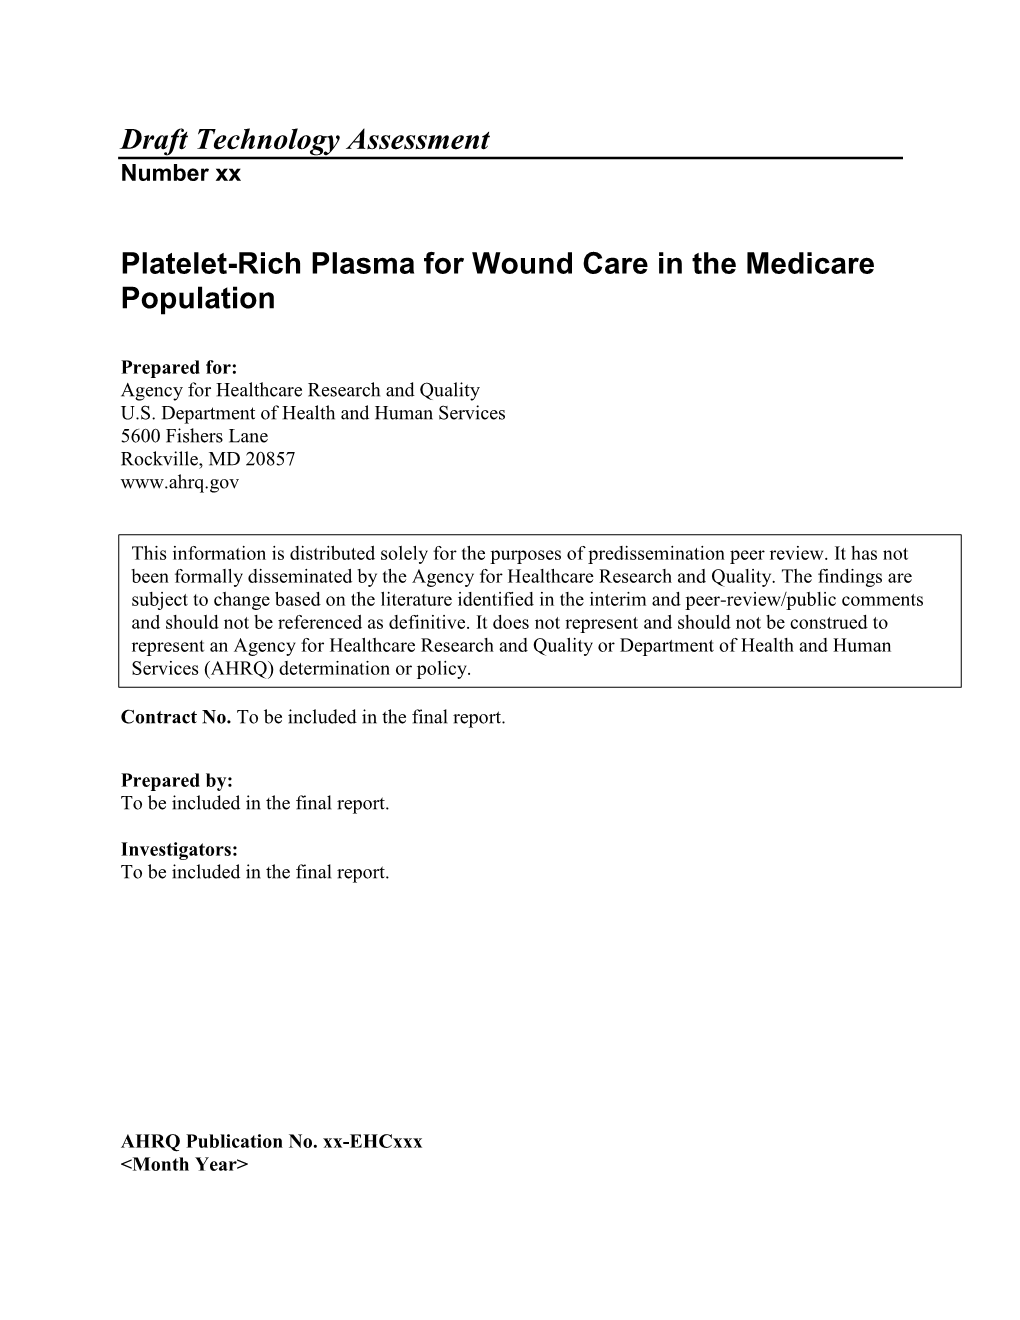 Platelet-Rich Plasma for Wound Care in the Medicare Population